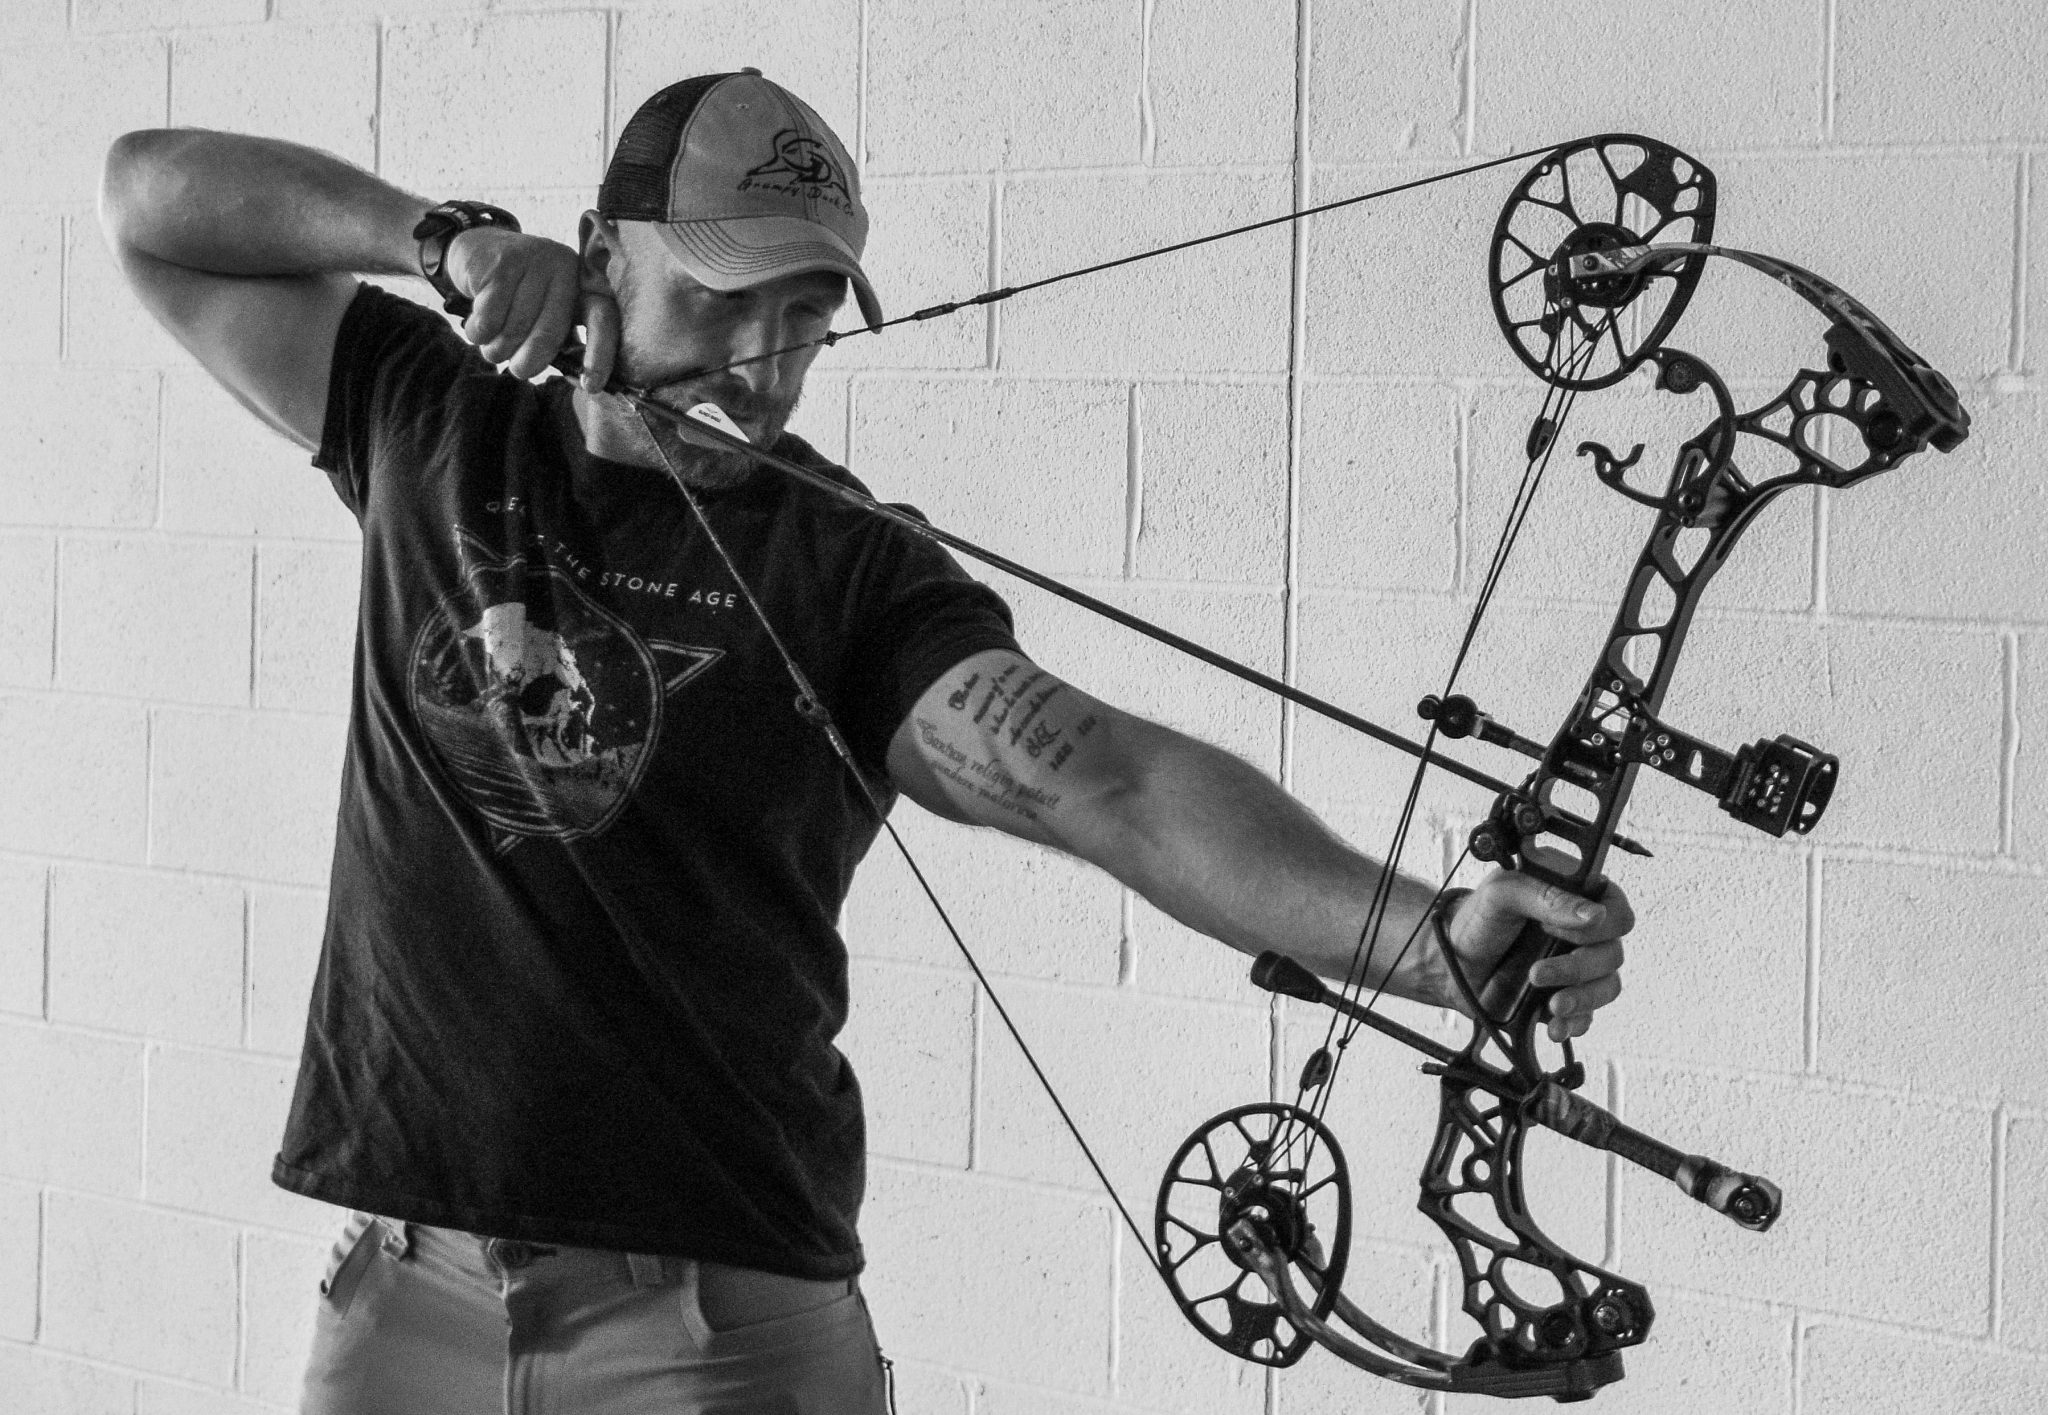 drawing a bow archery exercises for hunting bowhunting functional strength